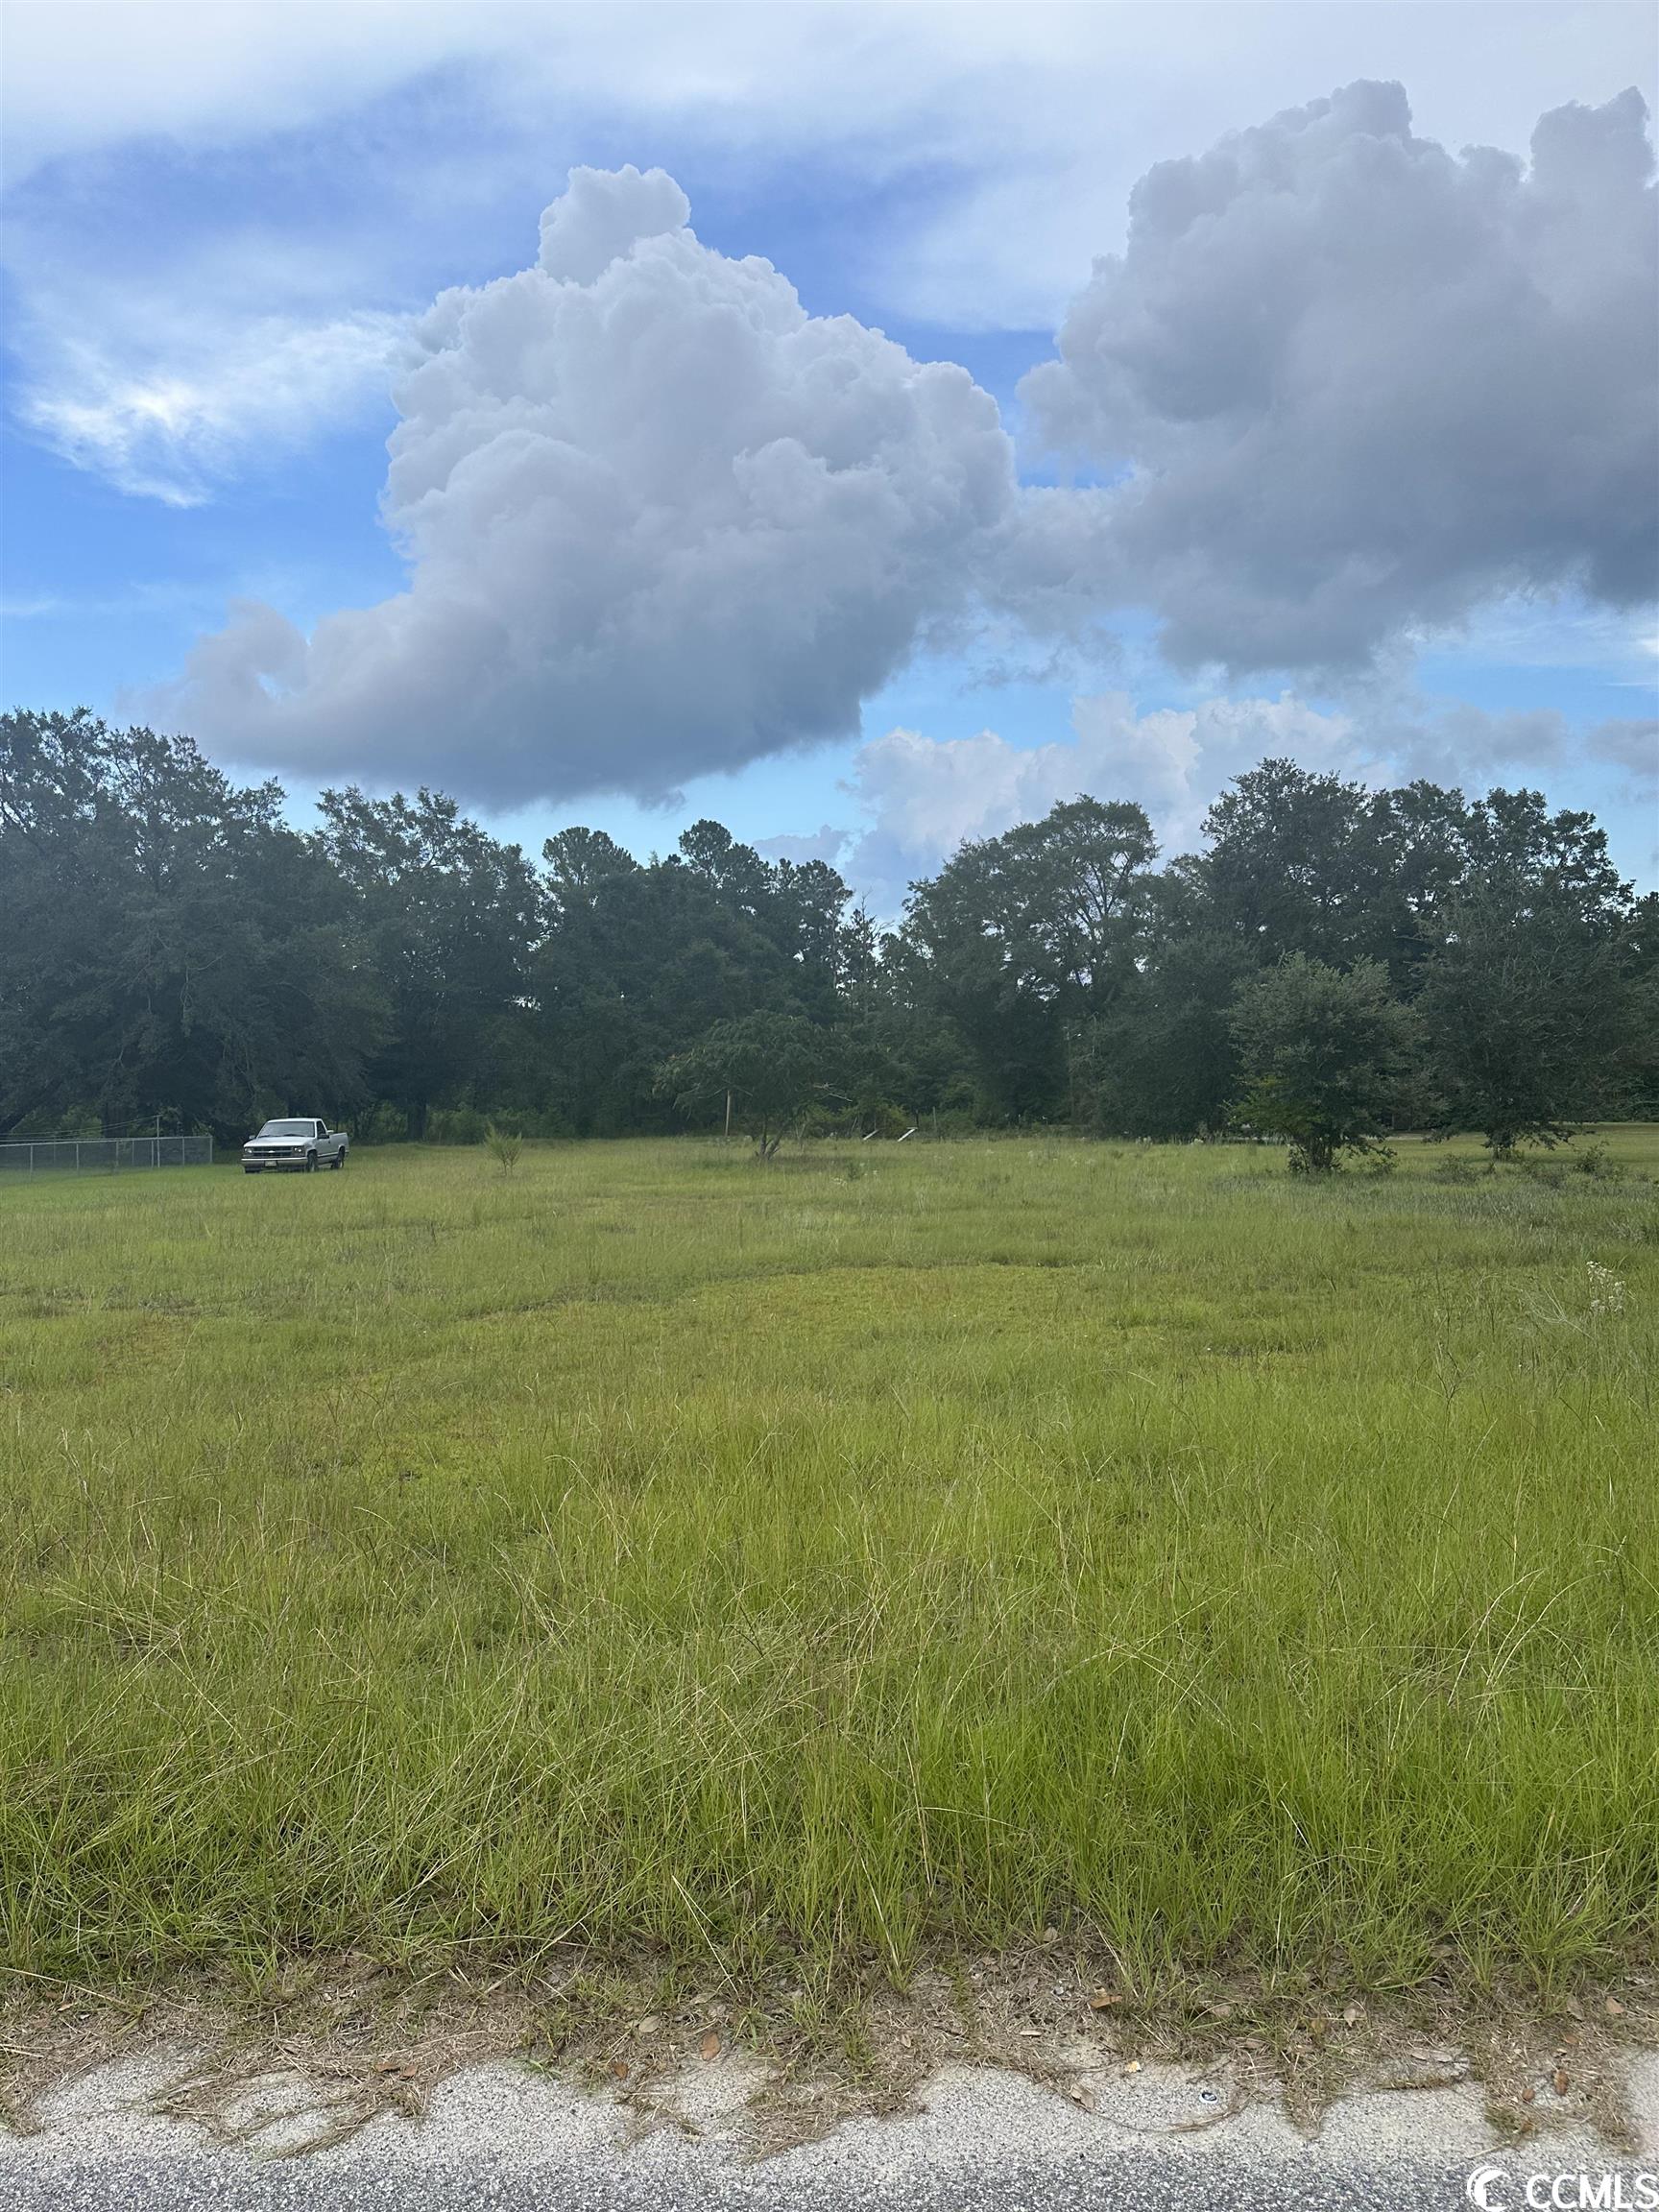 unveil a world of possibilities with this incredible 2.86-acre parcel of land in georgetown, south carolina, zoned vr-10! this gem comes ready for your vision, whether that's a mobile home, stick-built, or modular residence. imagine stepping onto this mostly cleared land that's not only pre-equipped with a septic tank but also offers the ability to tap into county water. you’re already steps ahead on your path to realizing your dream. with its tranquil setting, you'll feel worlds away, yet relish the convenience of being close to everything georgetown has to offer—shopping, fine dining, healthcare, and so much more. this property serves as the ultimate setting for the life you've always envisioned, complemented by the flexibility to select a home that aligns with your specific needs. whether you're an investor on the hunt for a high-potential opportunity or an individual eager to create a space that's uniquely yours, the versatility offered by this land is second to none. don't let this rare opportunity slip through your fingers—contact us today to schedule your exclusive showing of this 2.86-acre canvas waiting for your creative touch in georgetown, south carolina.